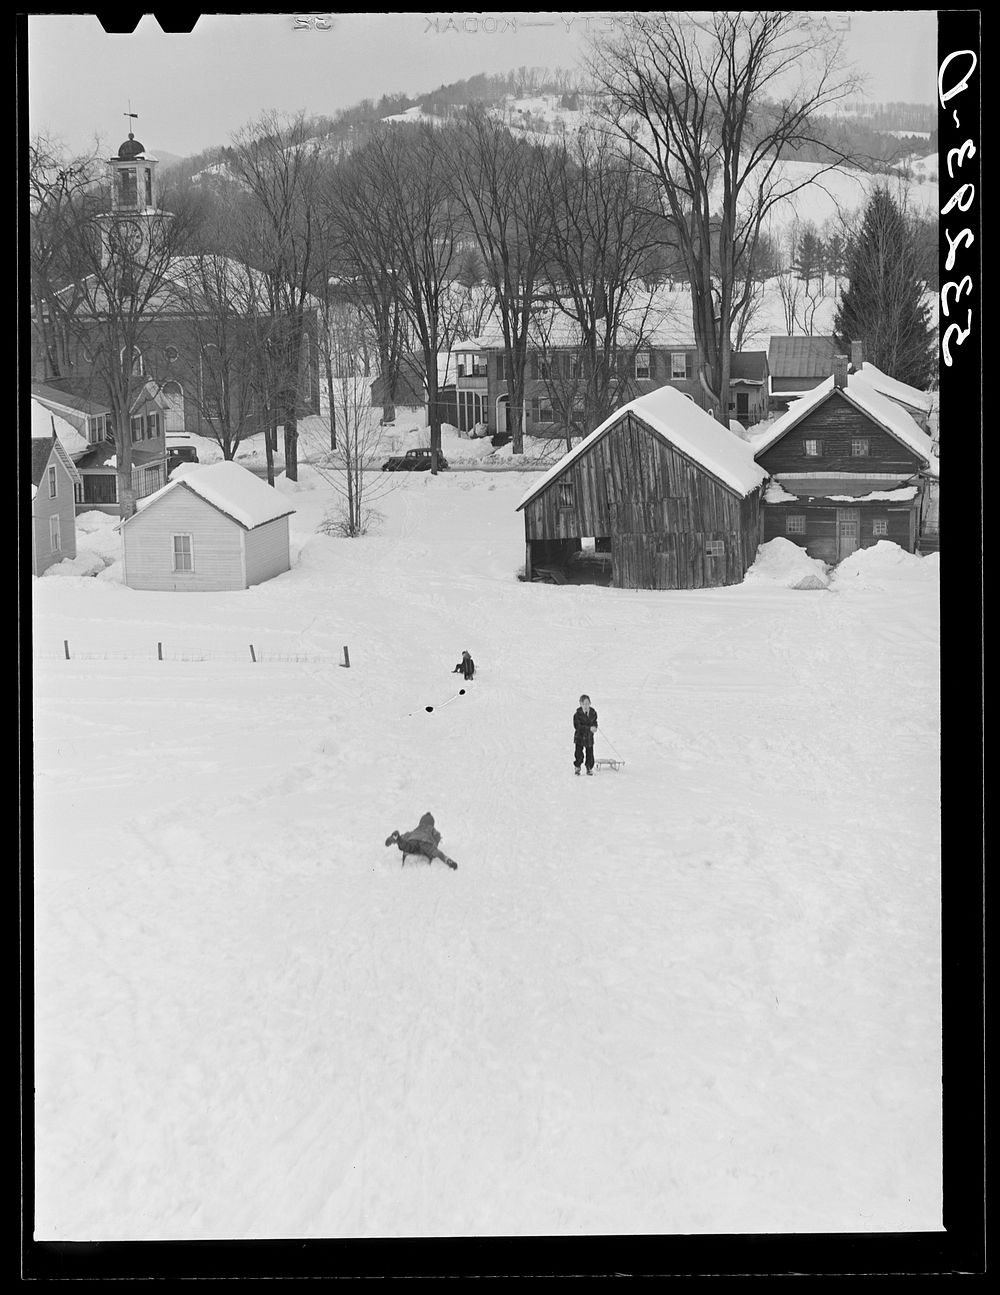 Children sleigh riding. Woodstock, Vermont. Sourced from the Library of Congress.